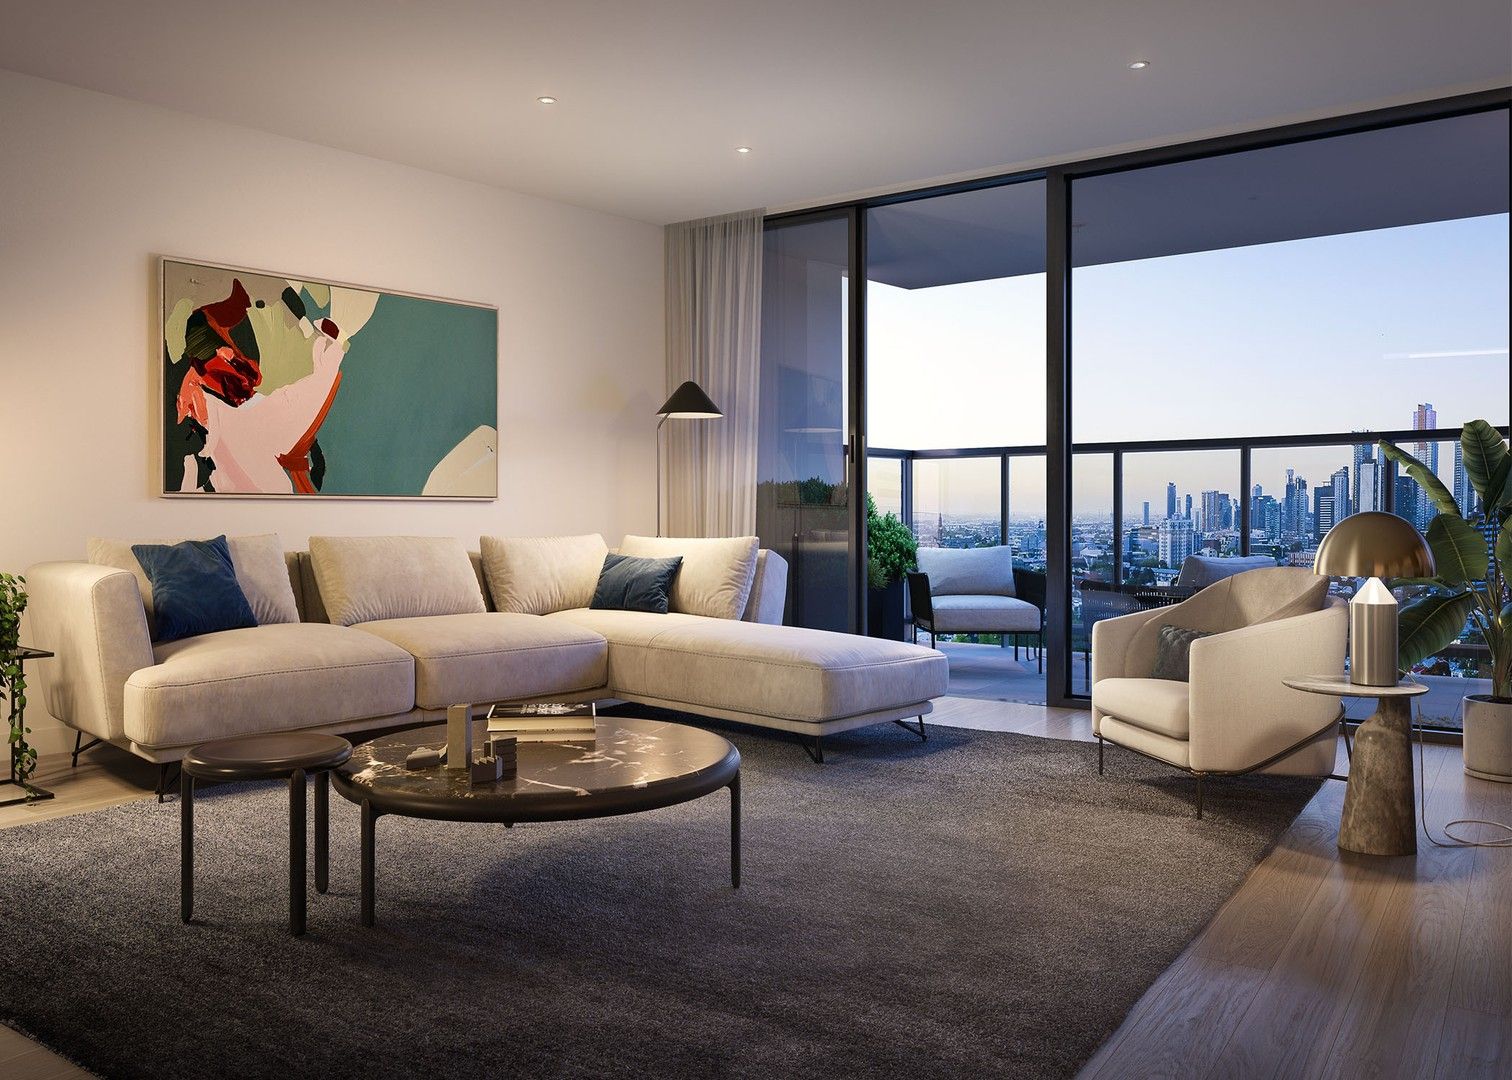 2 bedrooms New Apartments / Off the Plan in  ST KILDA VIC, 3182